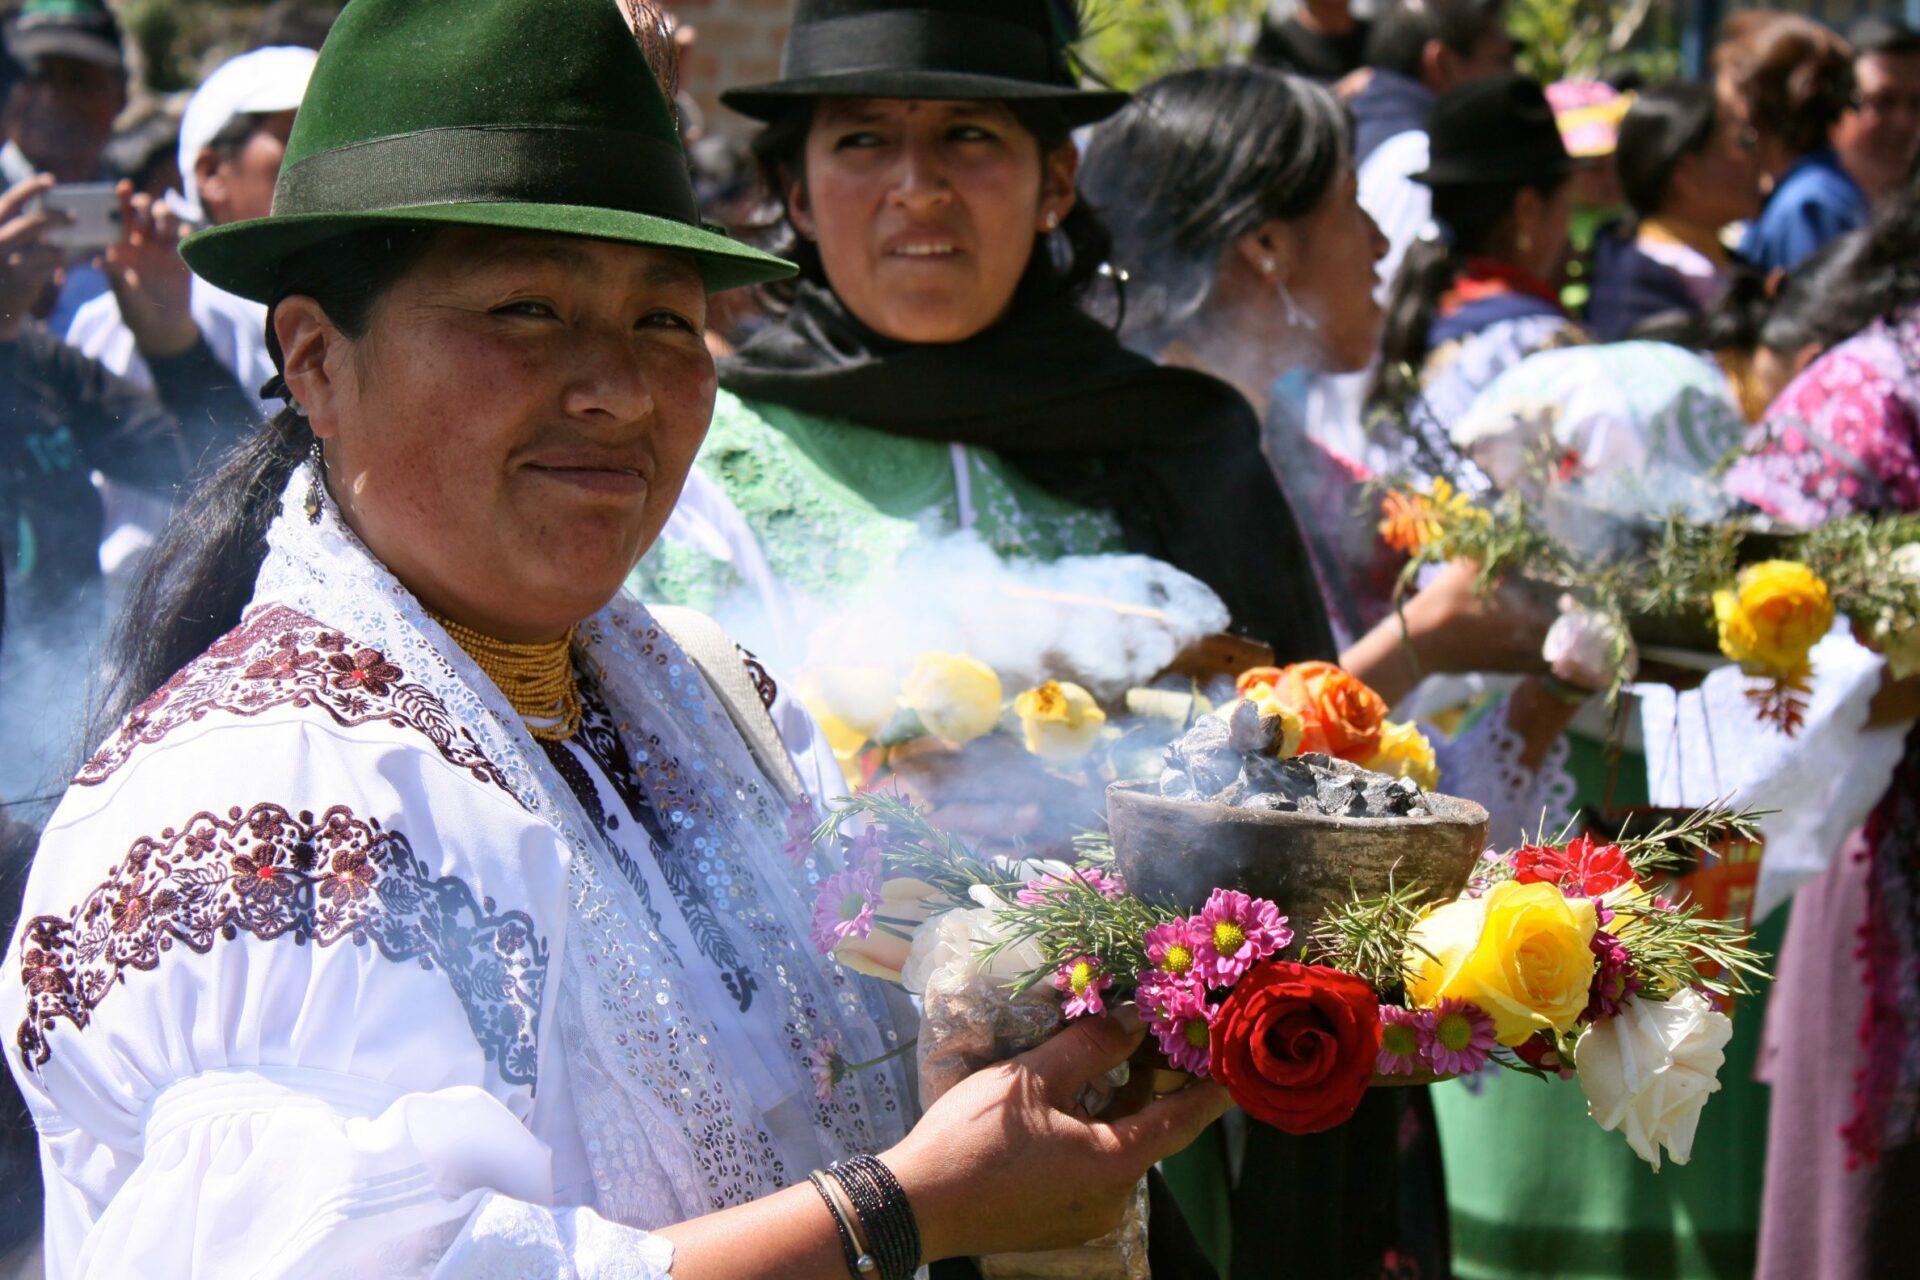 two women holding flowers at a marketplace